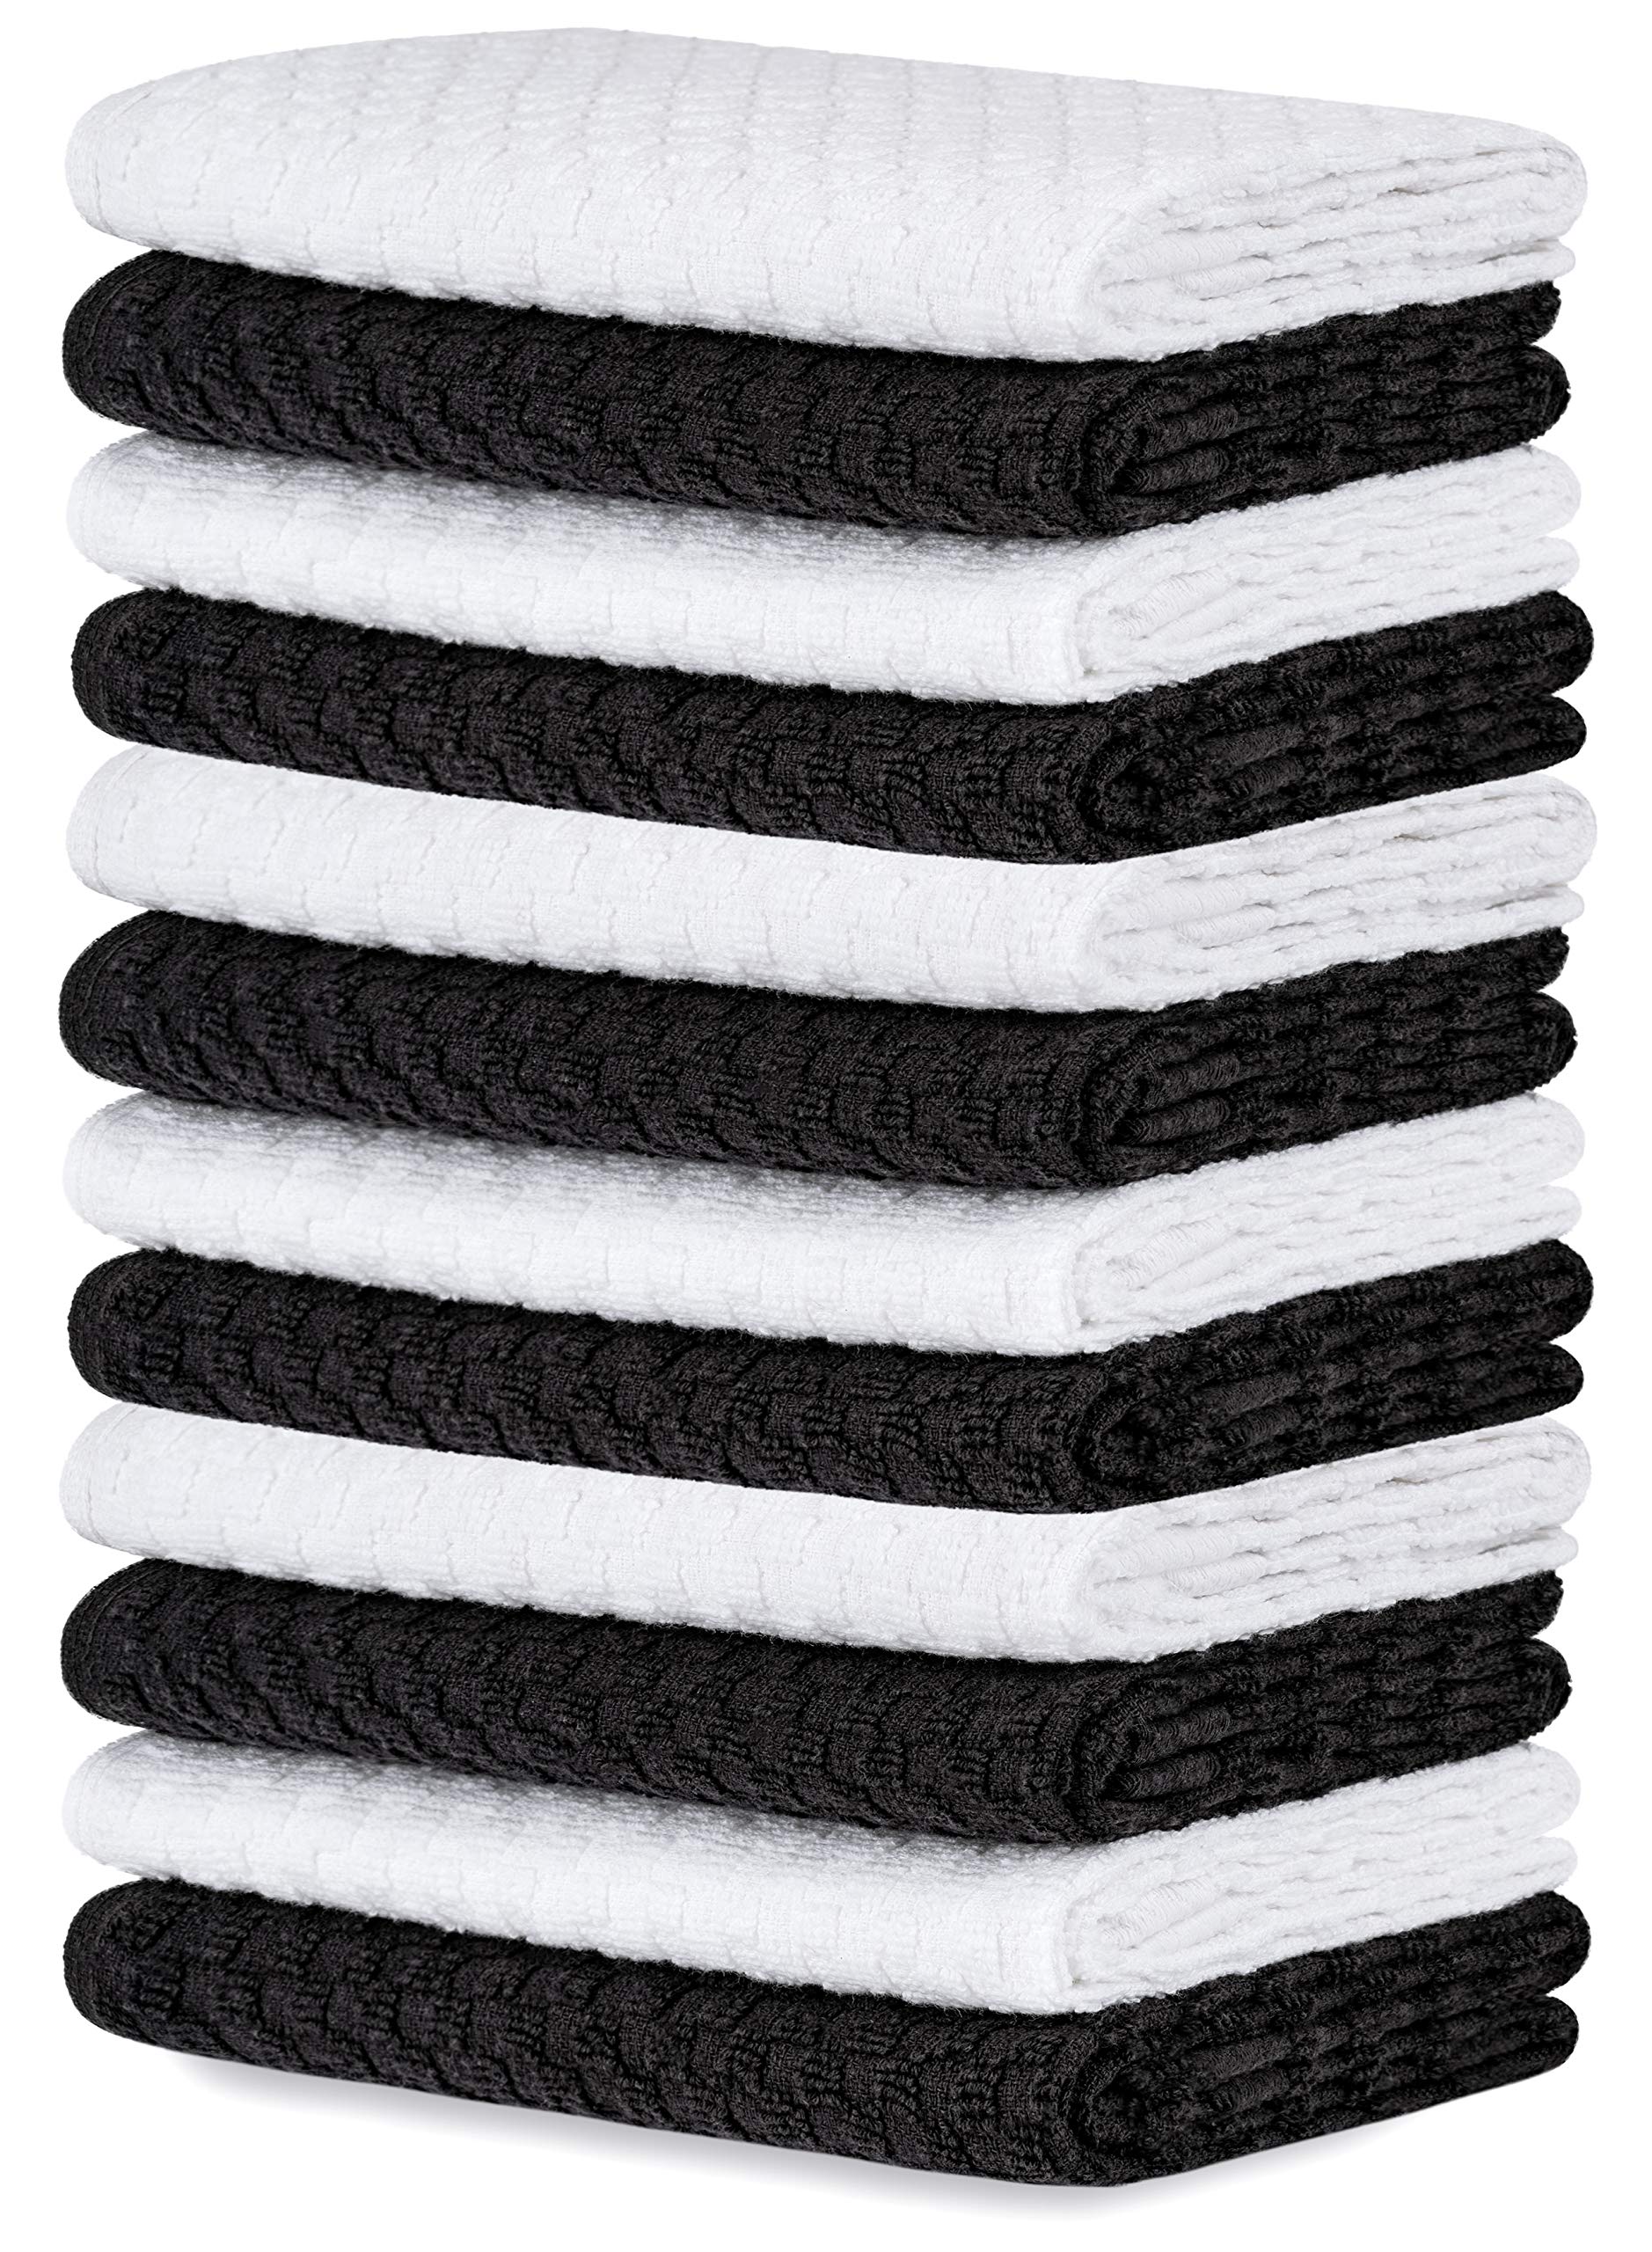 Kitchen Towels (12 Pack, 15 x 26 Inch) Cotton - Machine Washable - Extra Soft Set of 12 Dobby Weave Dish Towels, Tea Towels, Bar Towels  - Very Good